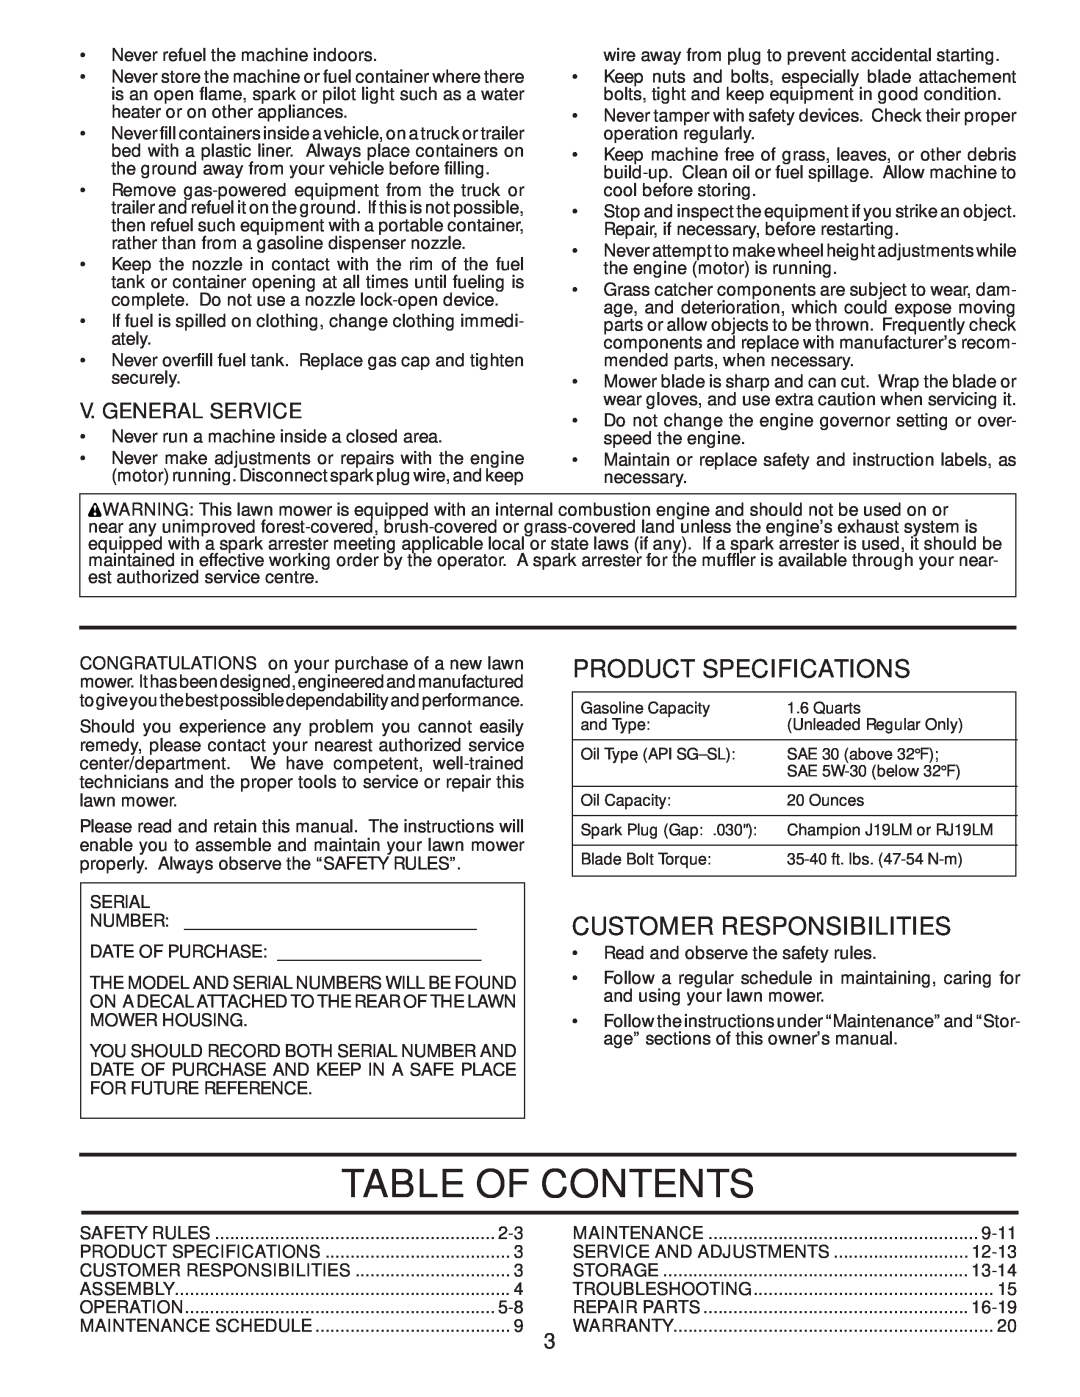 Husqvarna 62522FE Table Of Contents, Product Specifications, Customer Responsibilities, V. General Service, 9-11, 12-13 